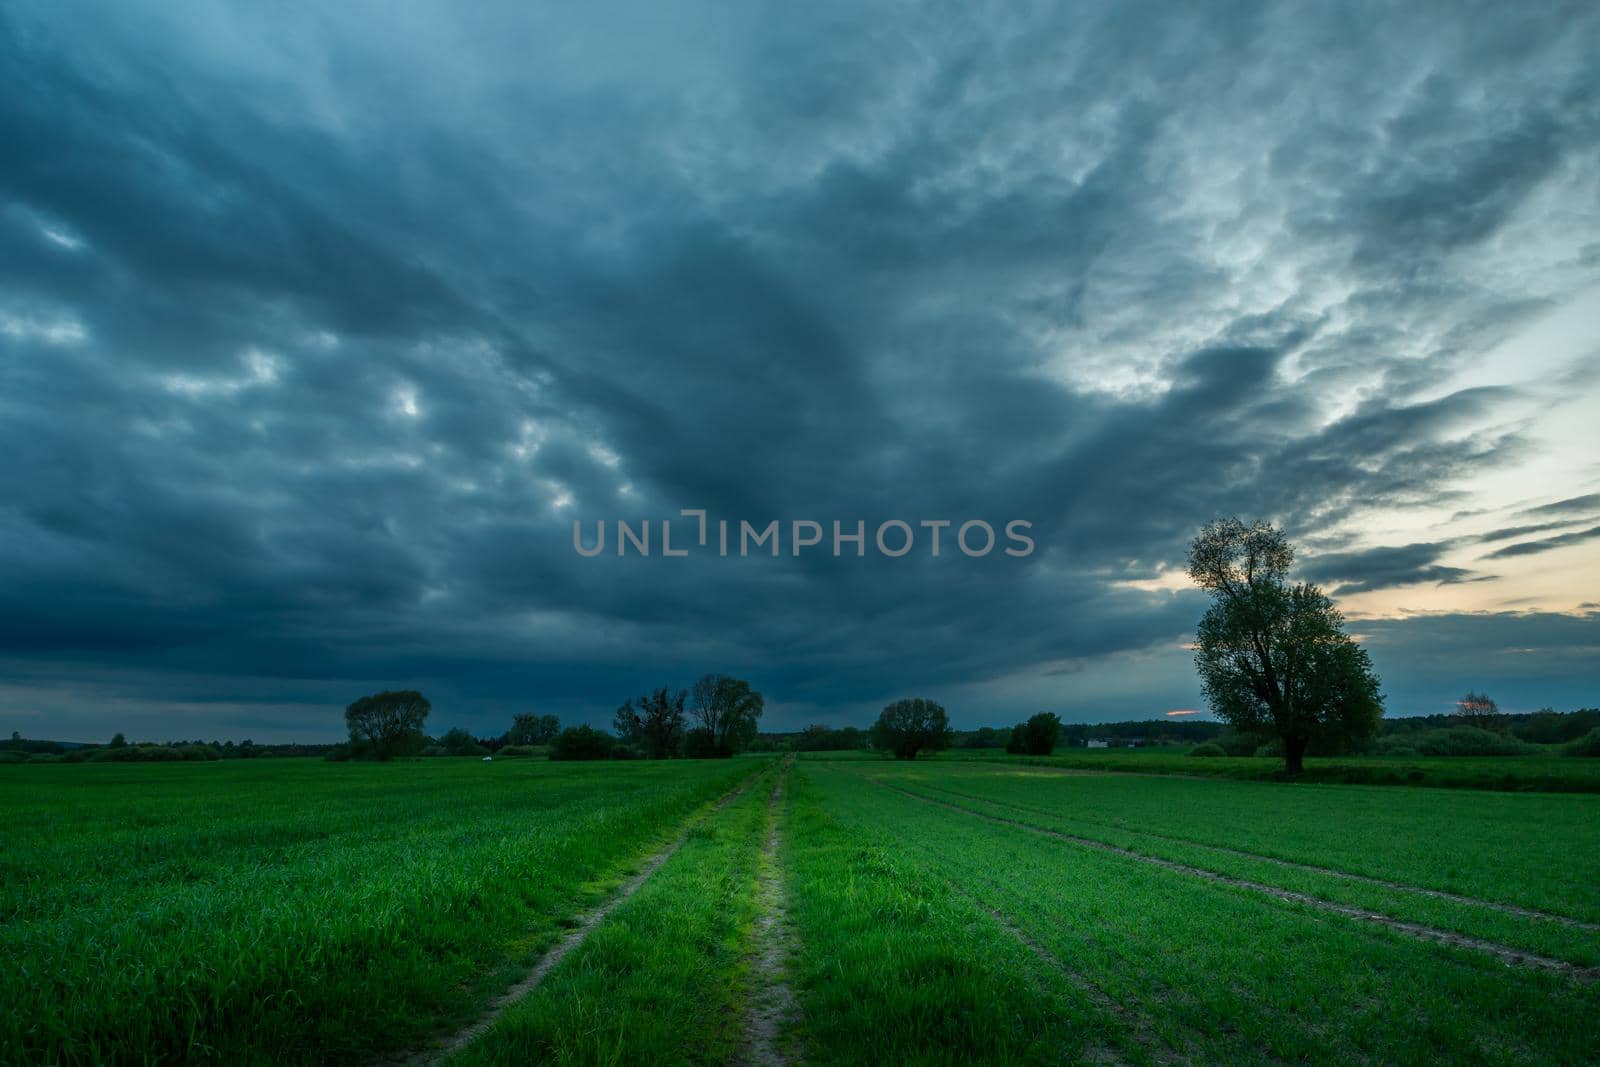 Road through green fields and rainy clouds by darekb22